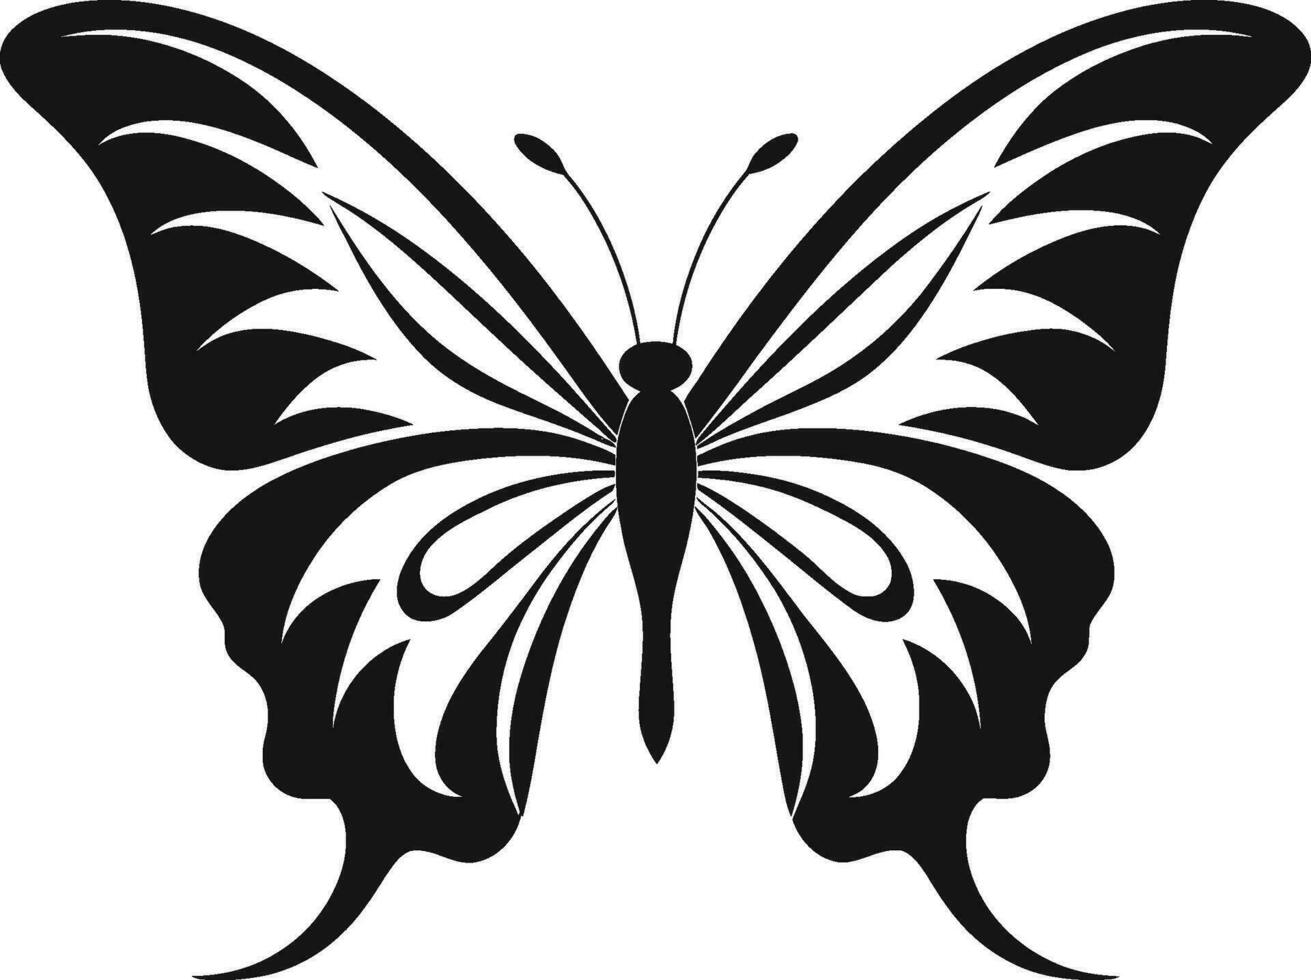 Butterfly Logo Design in Noir Grace and Freedom Sleek and Stylish Black Butterfly Icon vector